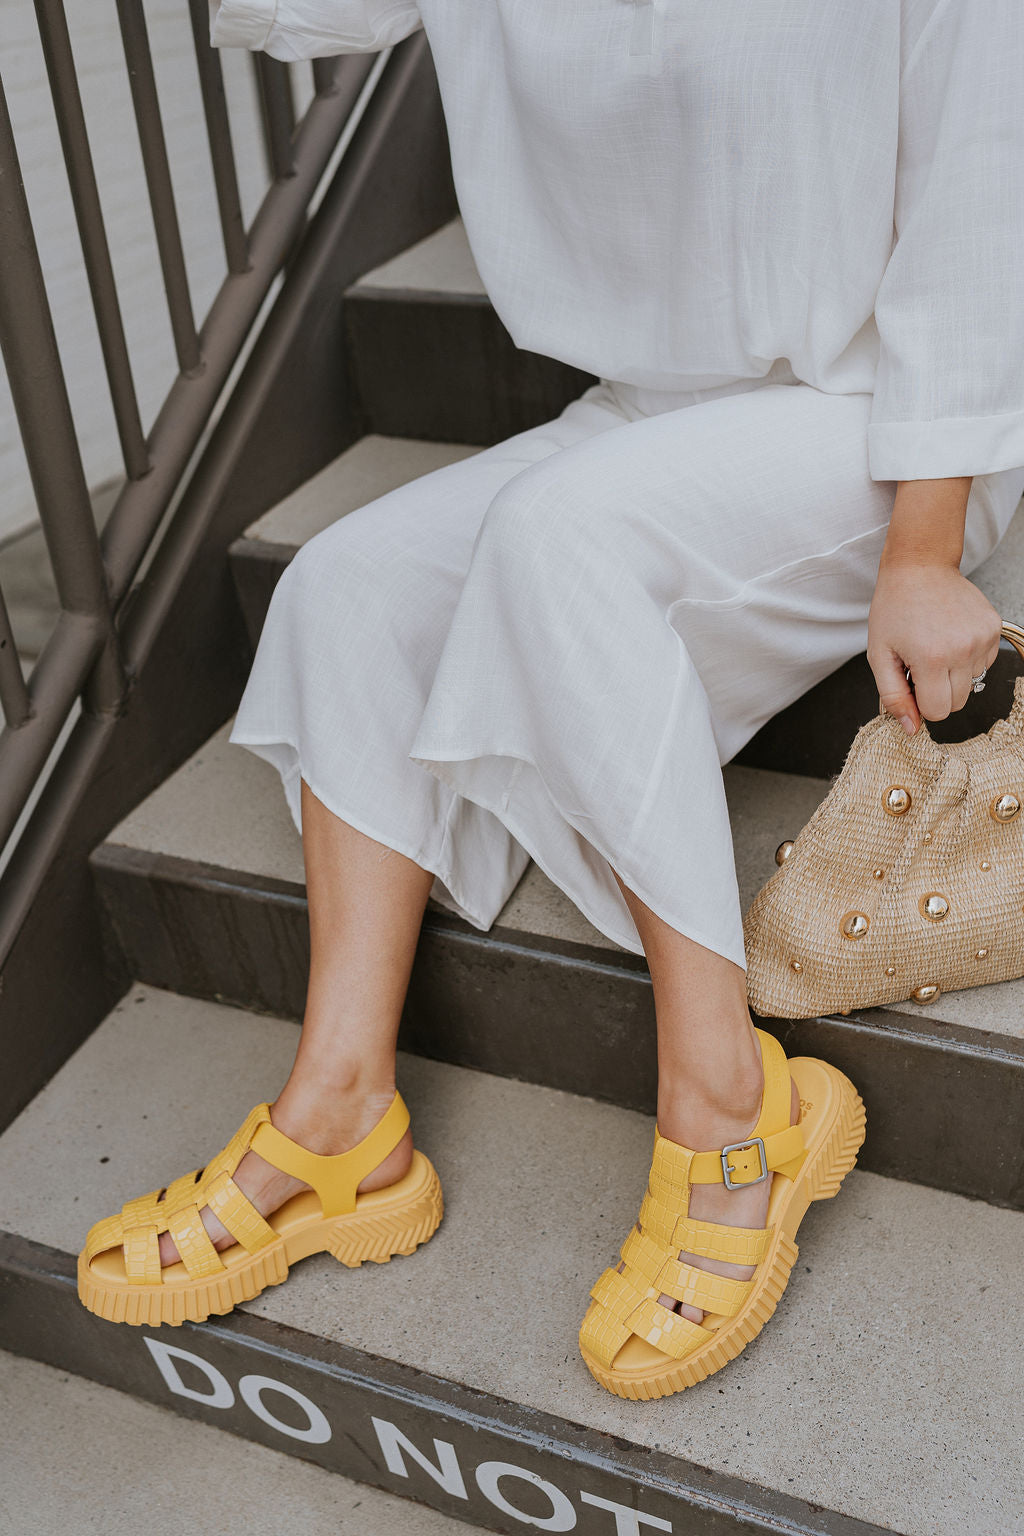 Side view of female model wearing the ONA Streetworks Fisherman Sandal in Yellow Ray & Pilsner which features Yellow Leather Upper Fabric, Monochrome Croc Details, Fisherman Sandal Silhouette, Adjustable Buckle Closure,  2" Heel Height and 1 1/2" Platform Height